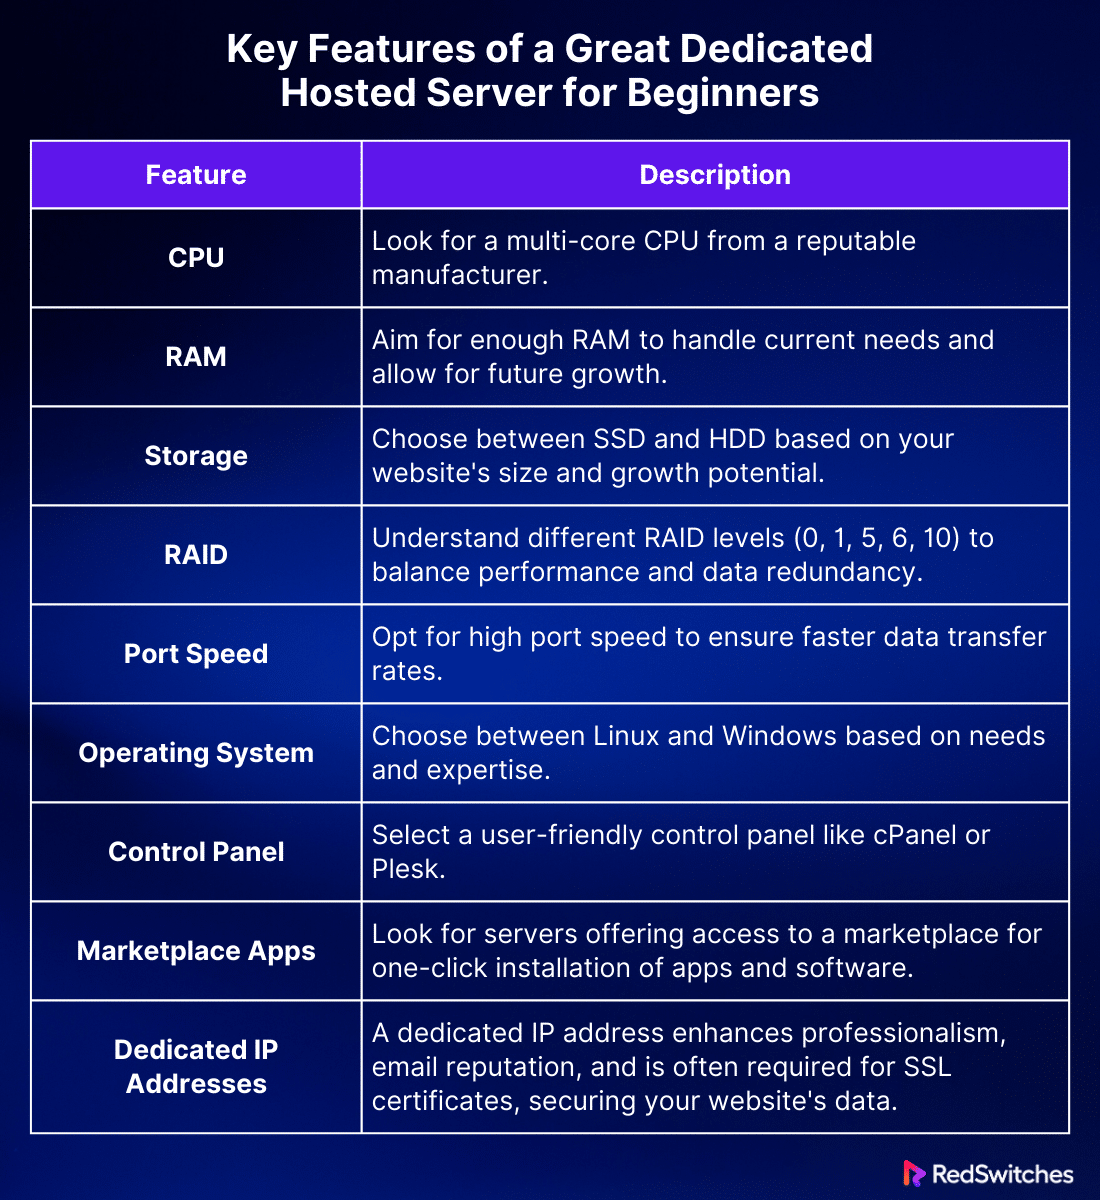 Key Features of a Great Dedicated Hosted Server for Beginners 